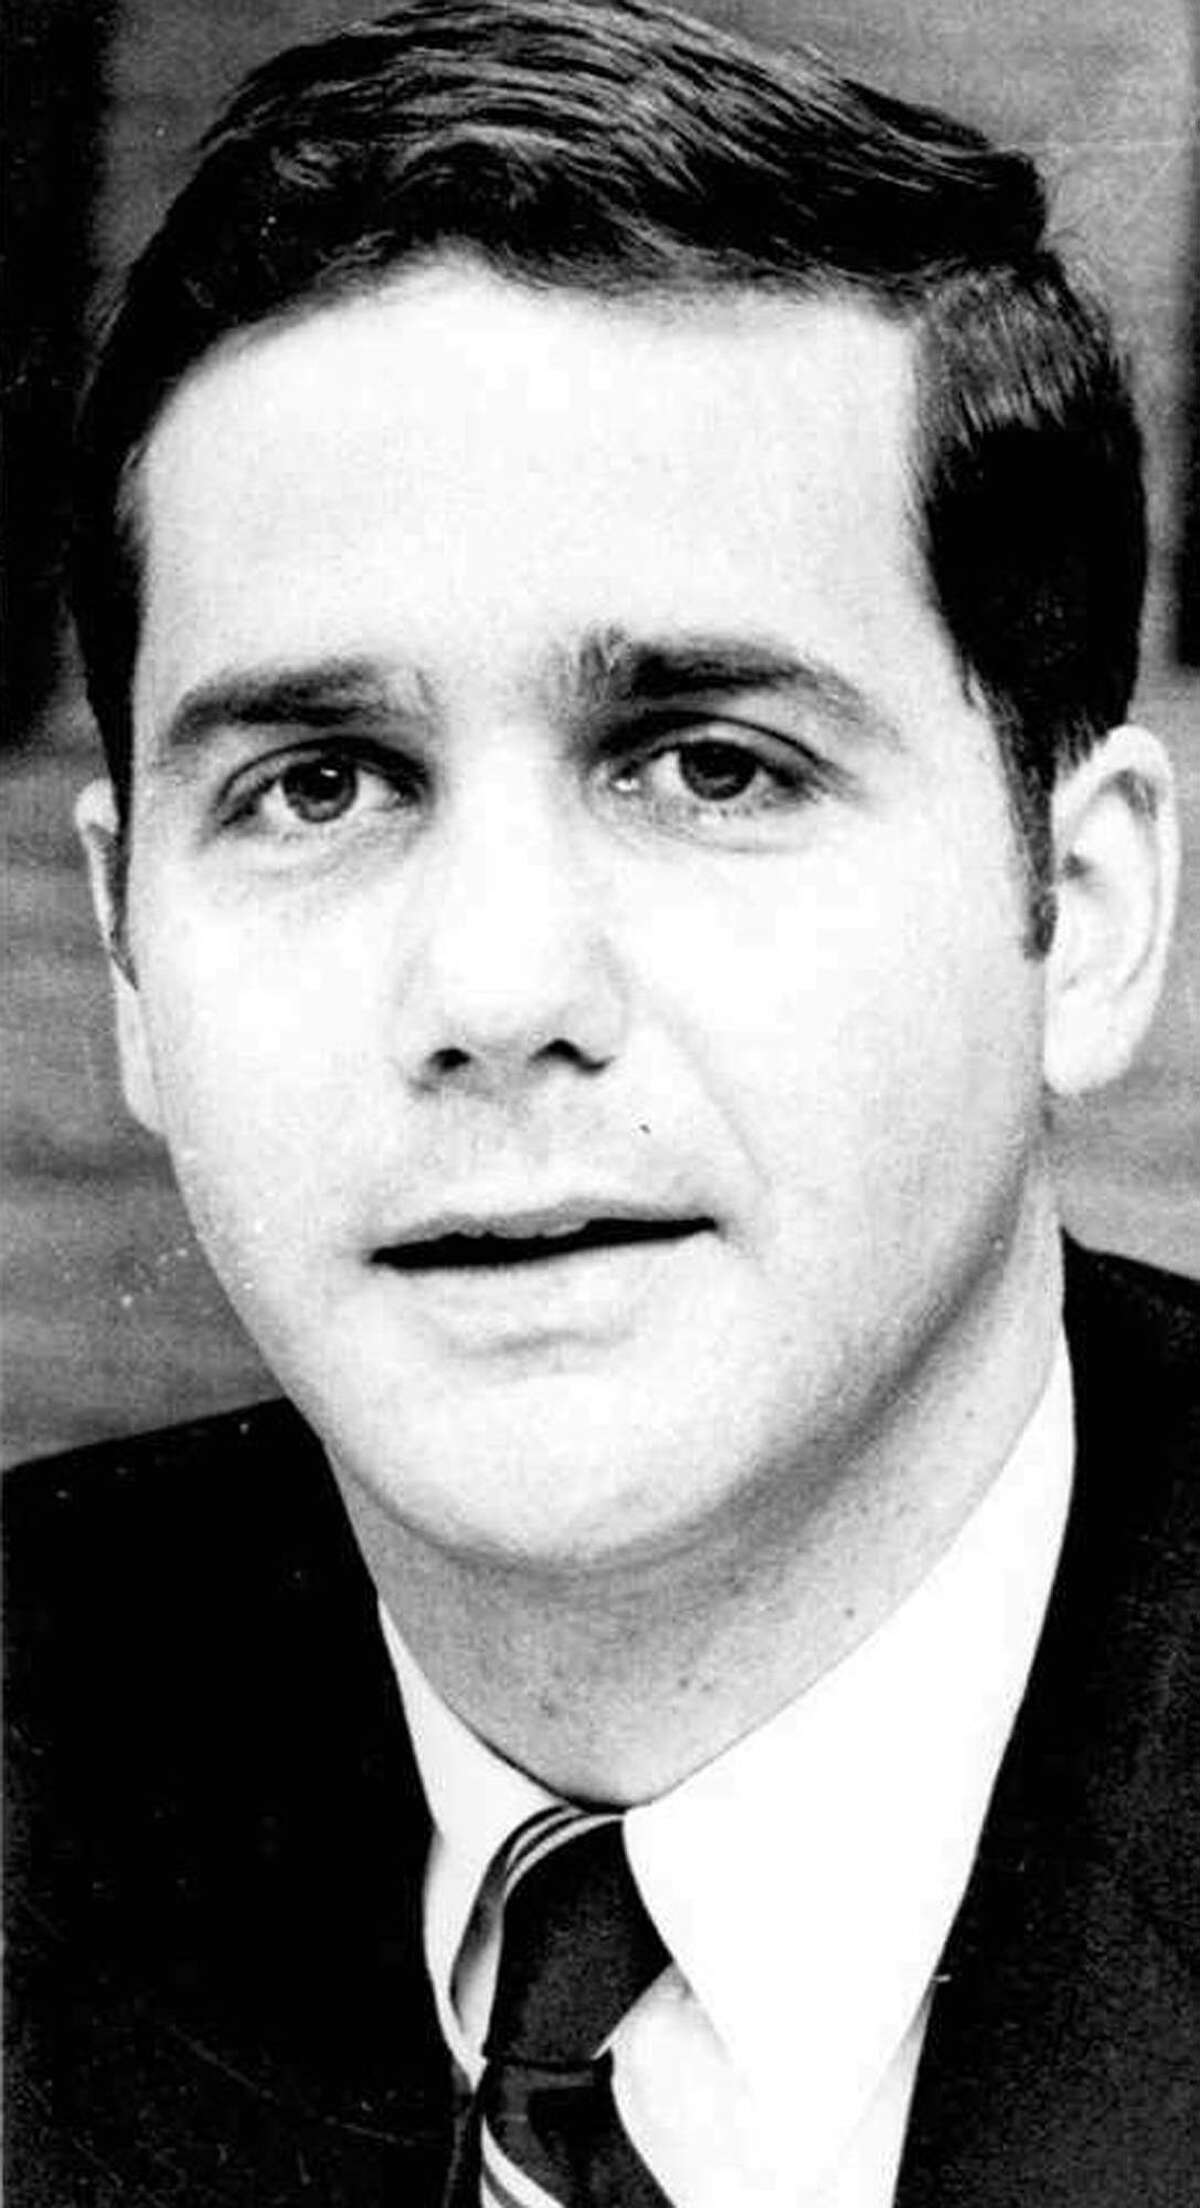 FILE - This undated file photo shows Jeb Stuart Magruder, former Deputy Campaign Manager for Richard Nixon's re-election campaign. Magruder, who spent seven months in prison for his role in covering up the 1972 break-in at Washington's Watergate complex, died Sunday, May 11, 2014, due to complications from a stroke. He was 79. (AP Photo/File)